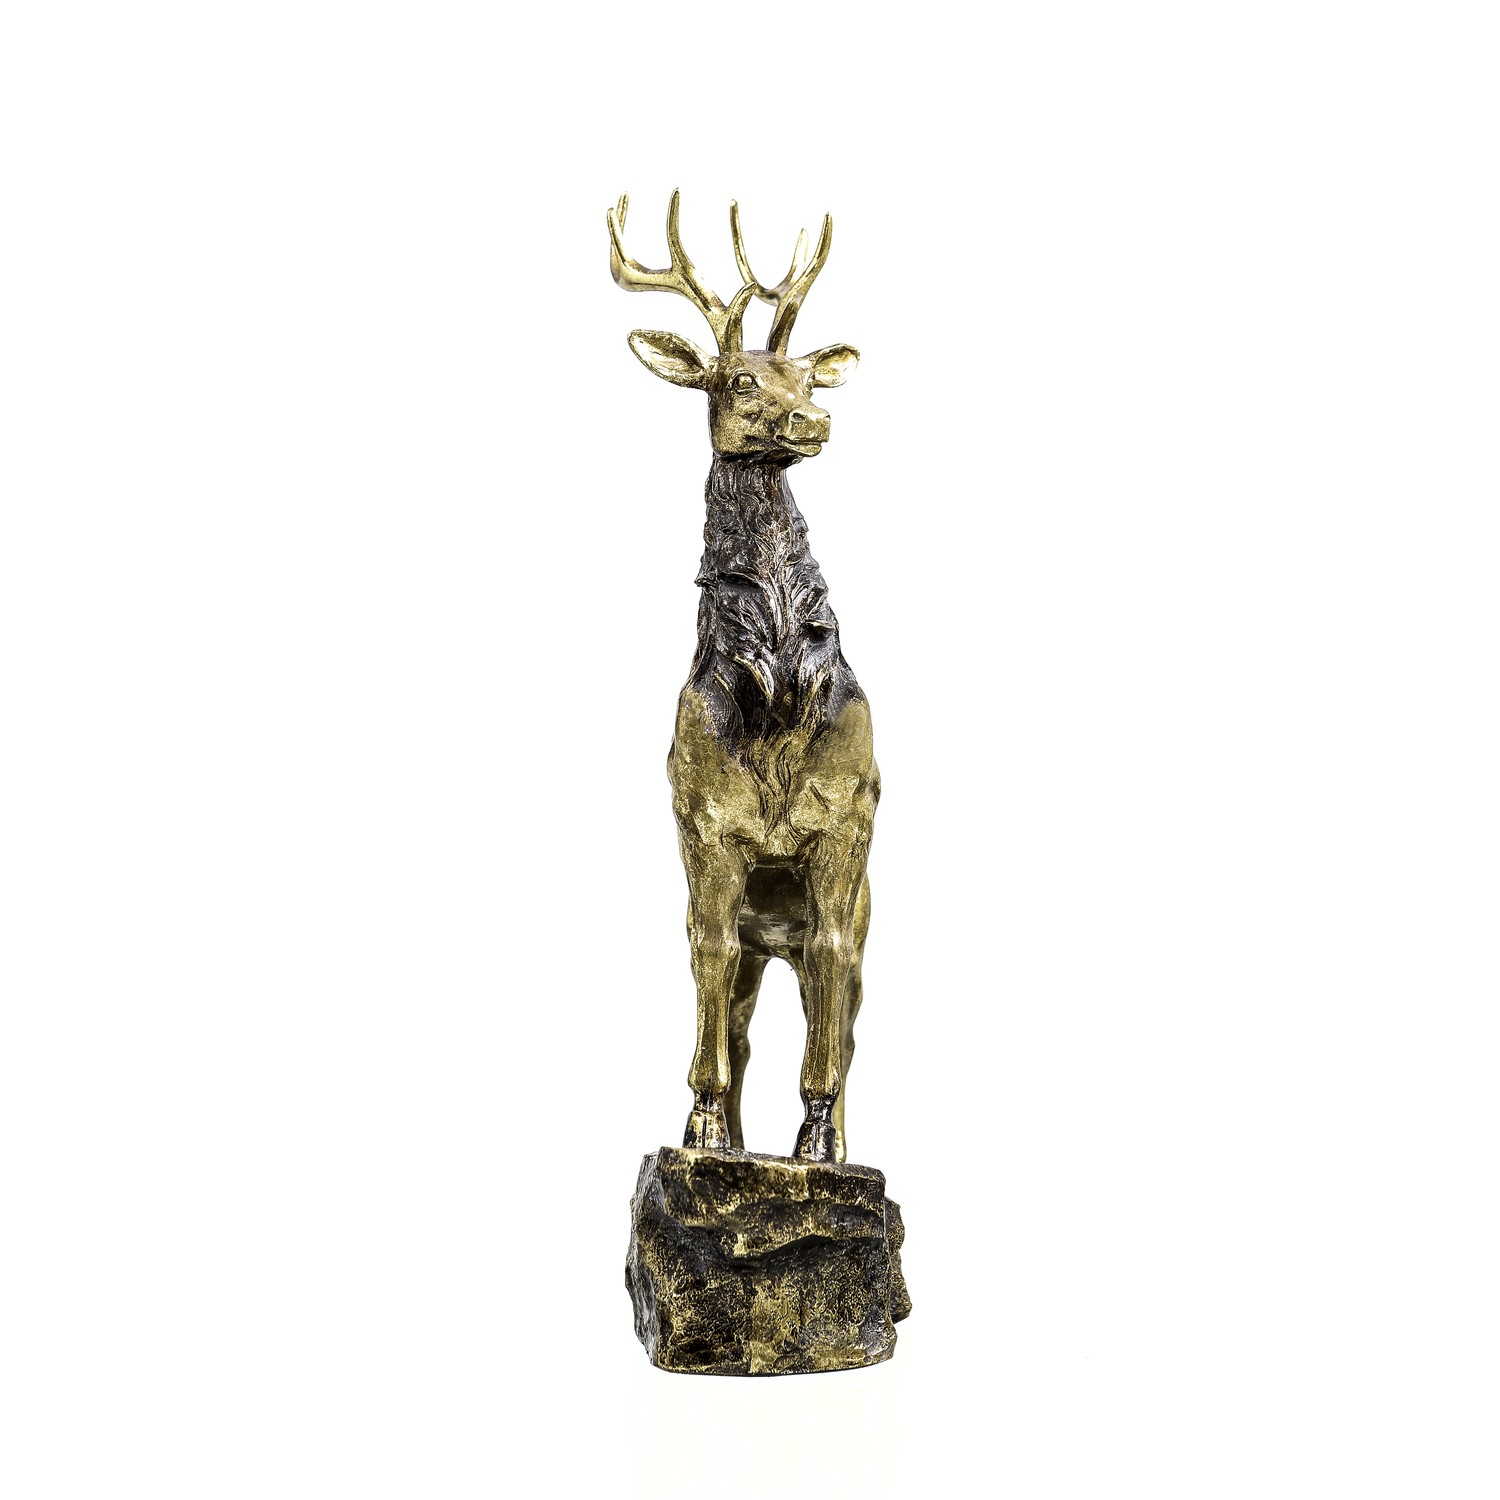 Large Gold Standing Stag Ornament - Image 3